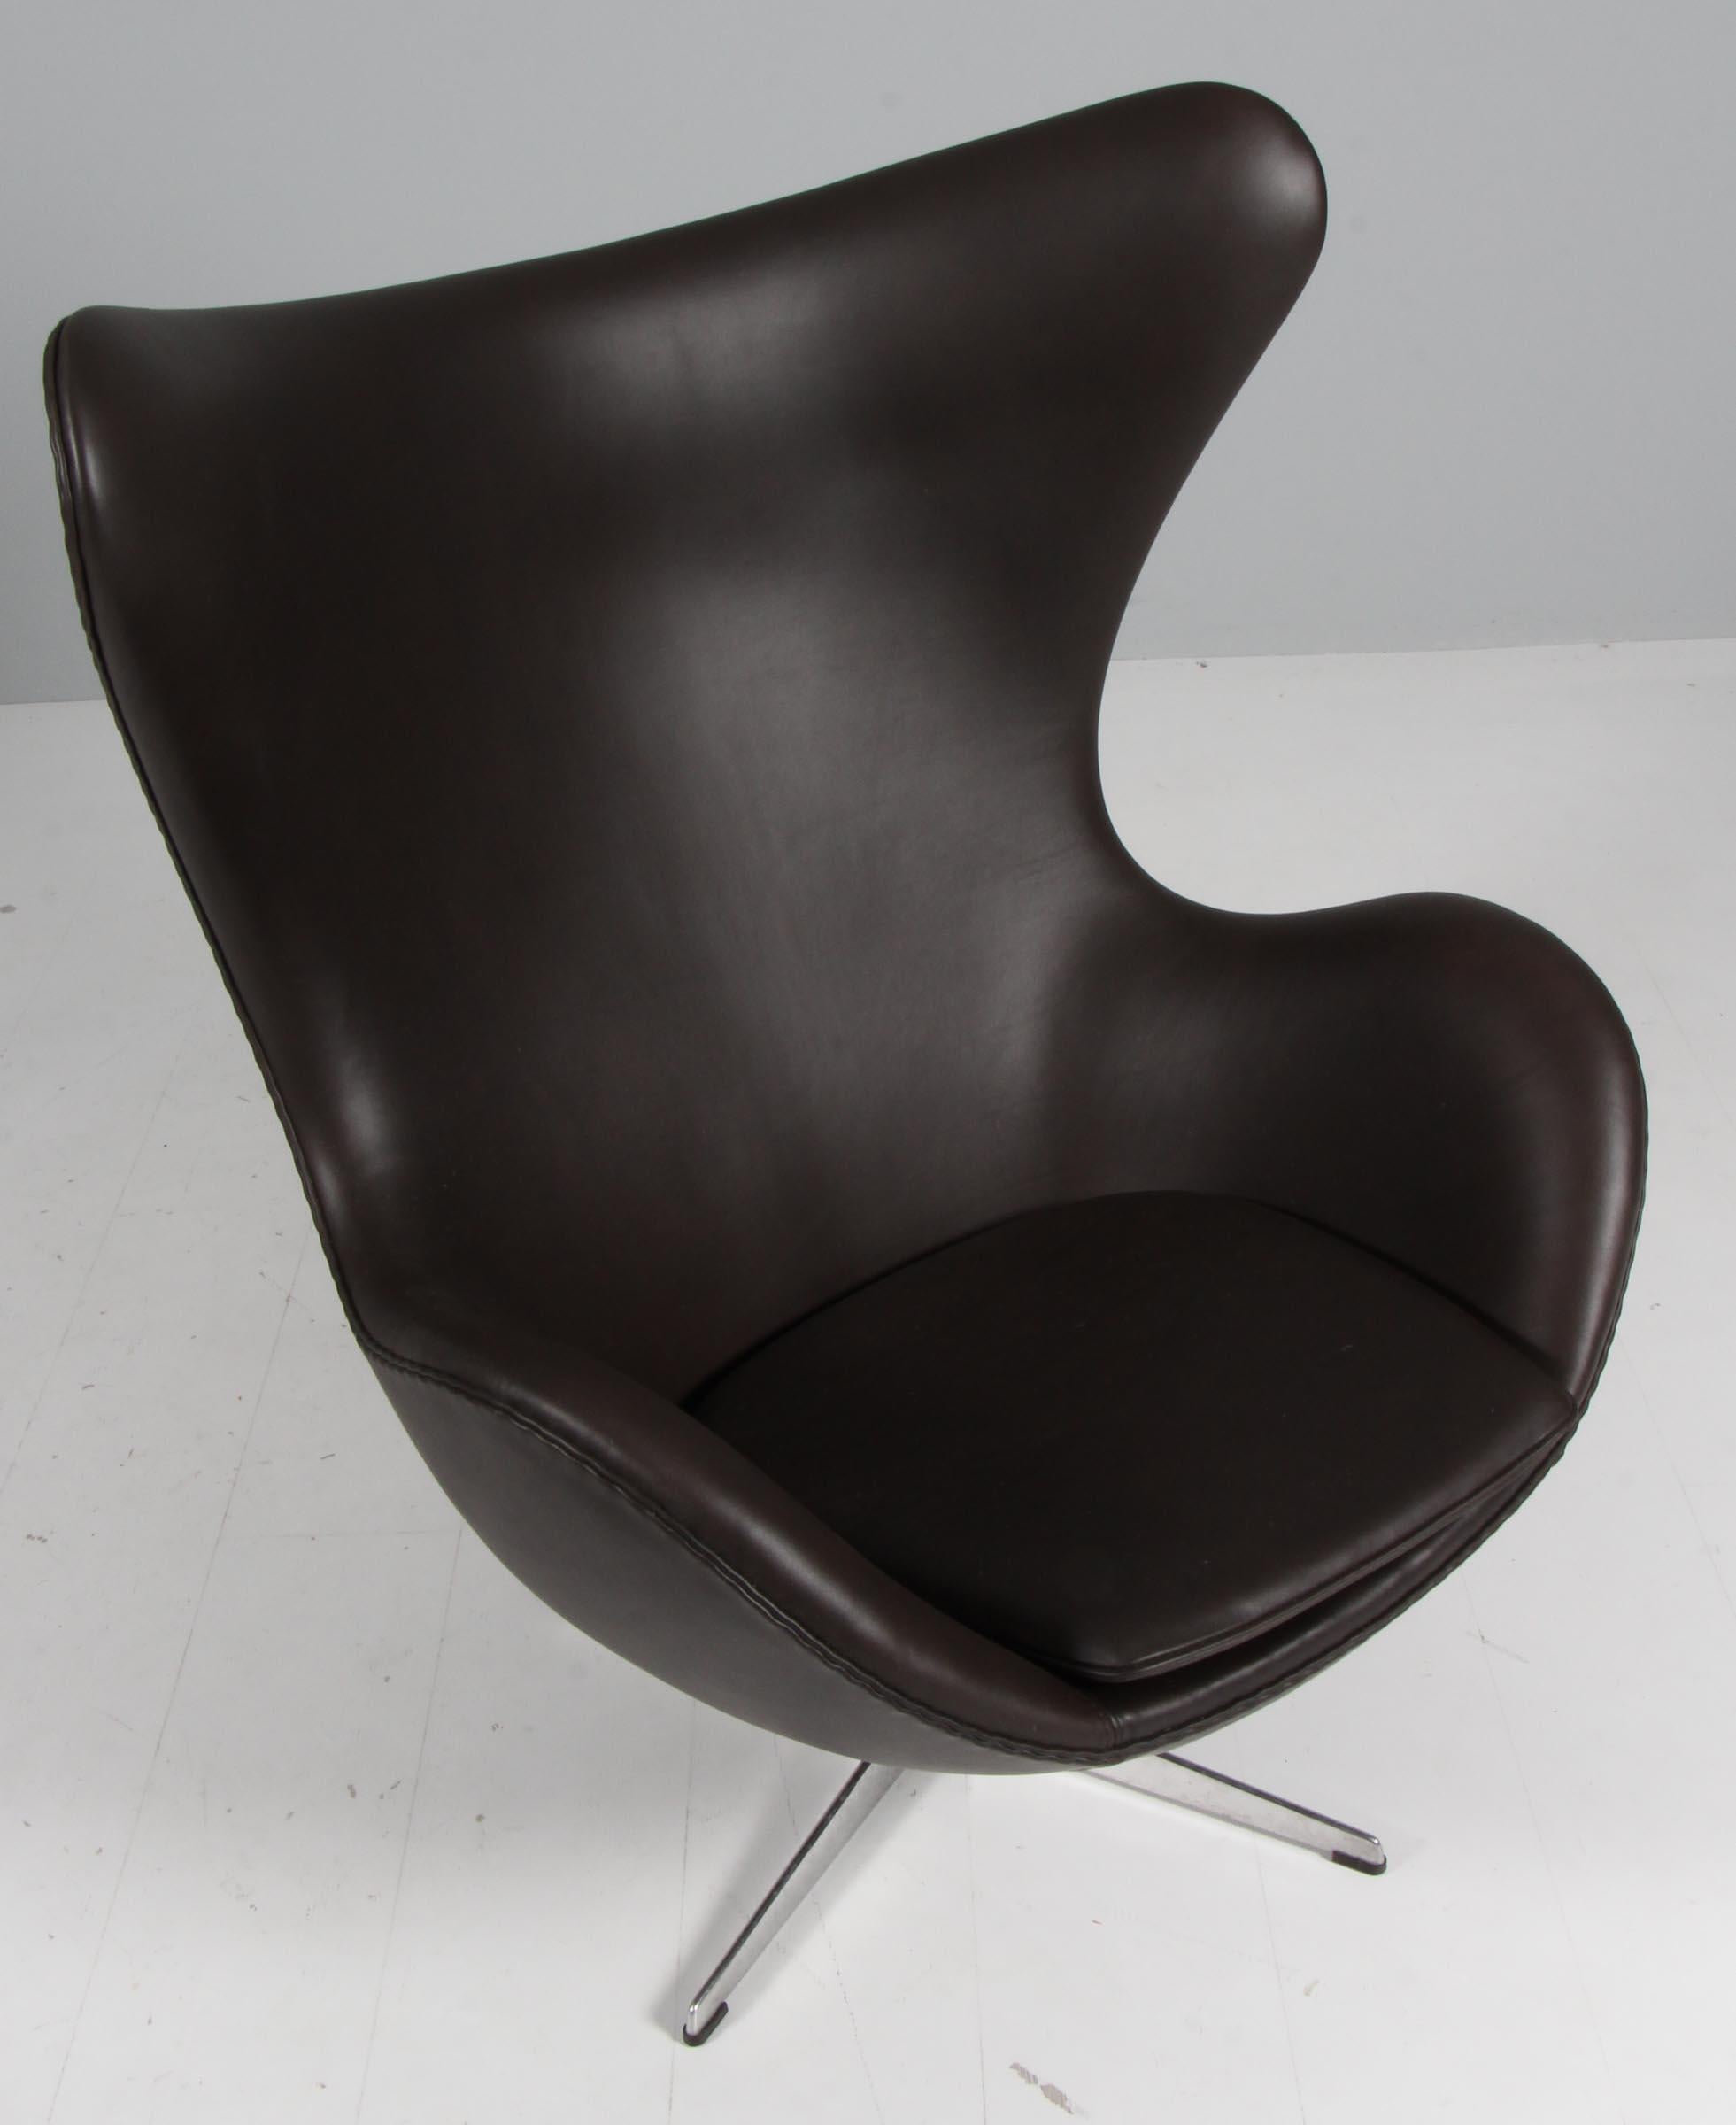 Arne Jacobsen lounge chair model Egg. New upholstered with mokka butter aniline leather.

Four star base profilated base.

Made by Fritz Hansen.

This iconic chair is one of the most famous chairs in the world and is recognized by design lovers in